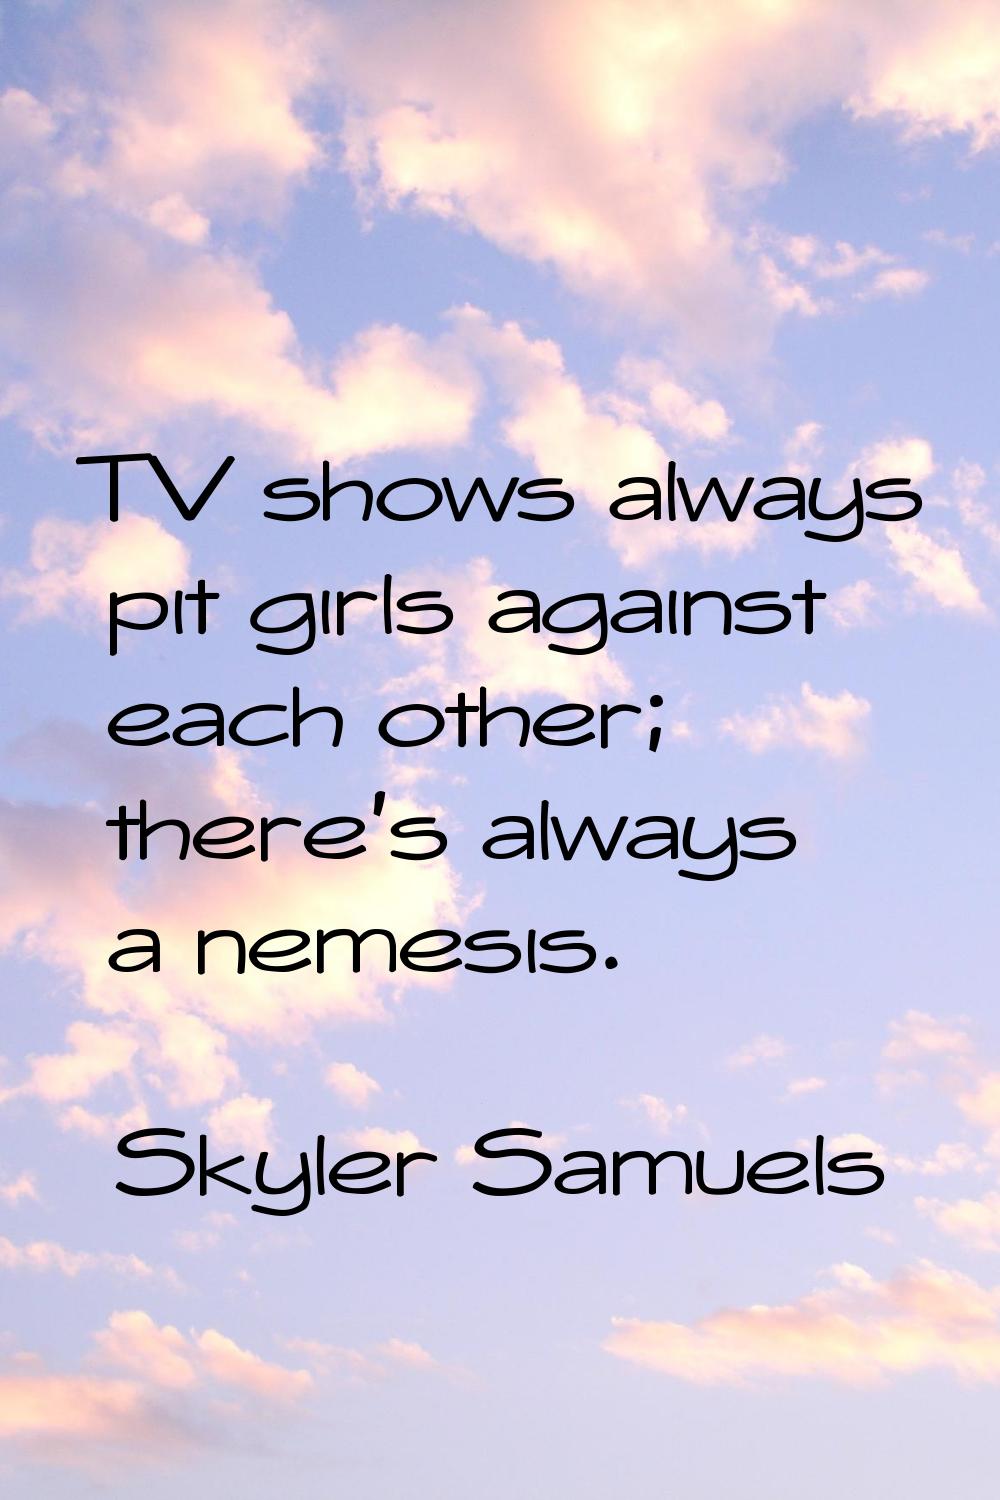 TV shows always pit girls against each other; there's always a nemesis.